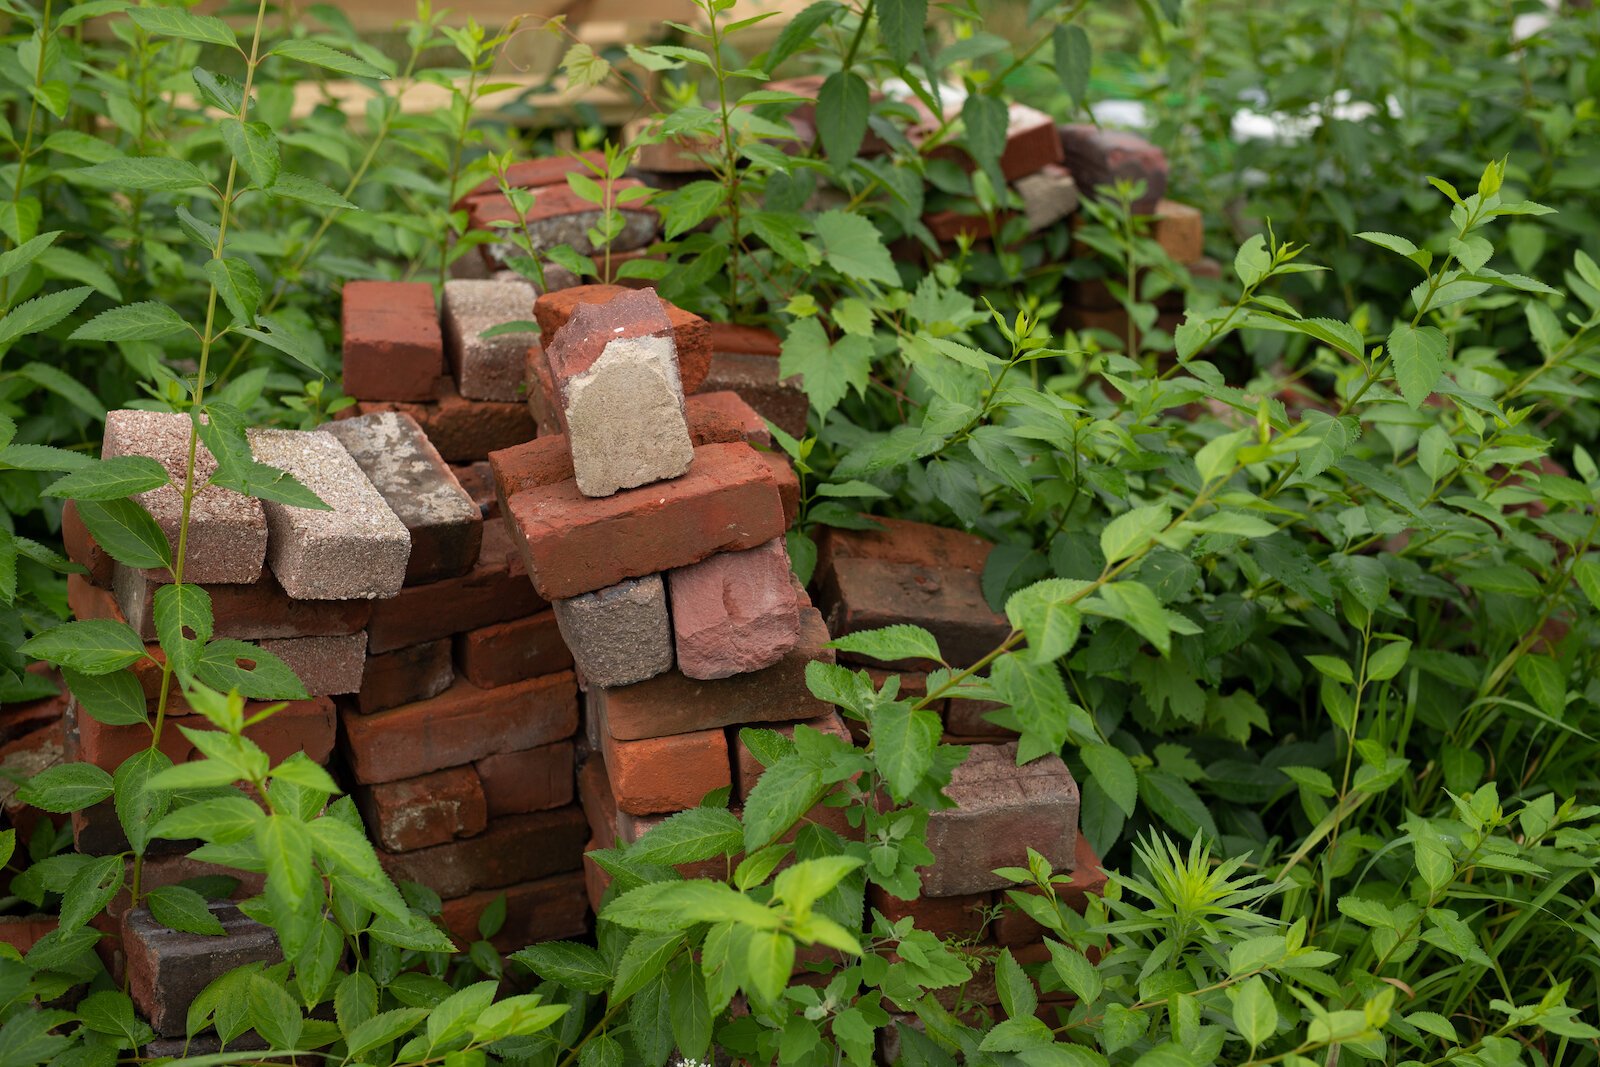 Cinder blocks are used in the natural food forest at Poplar Village Gardens.